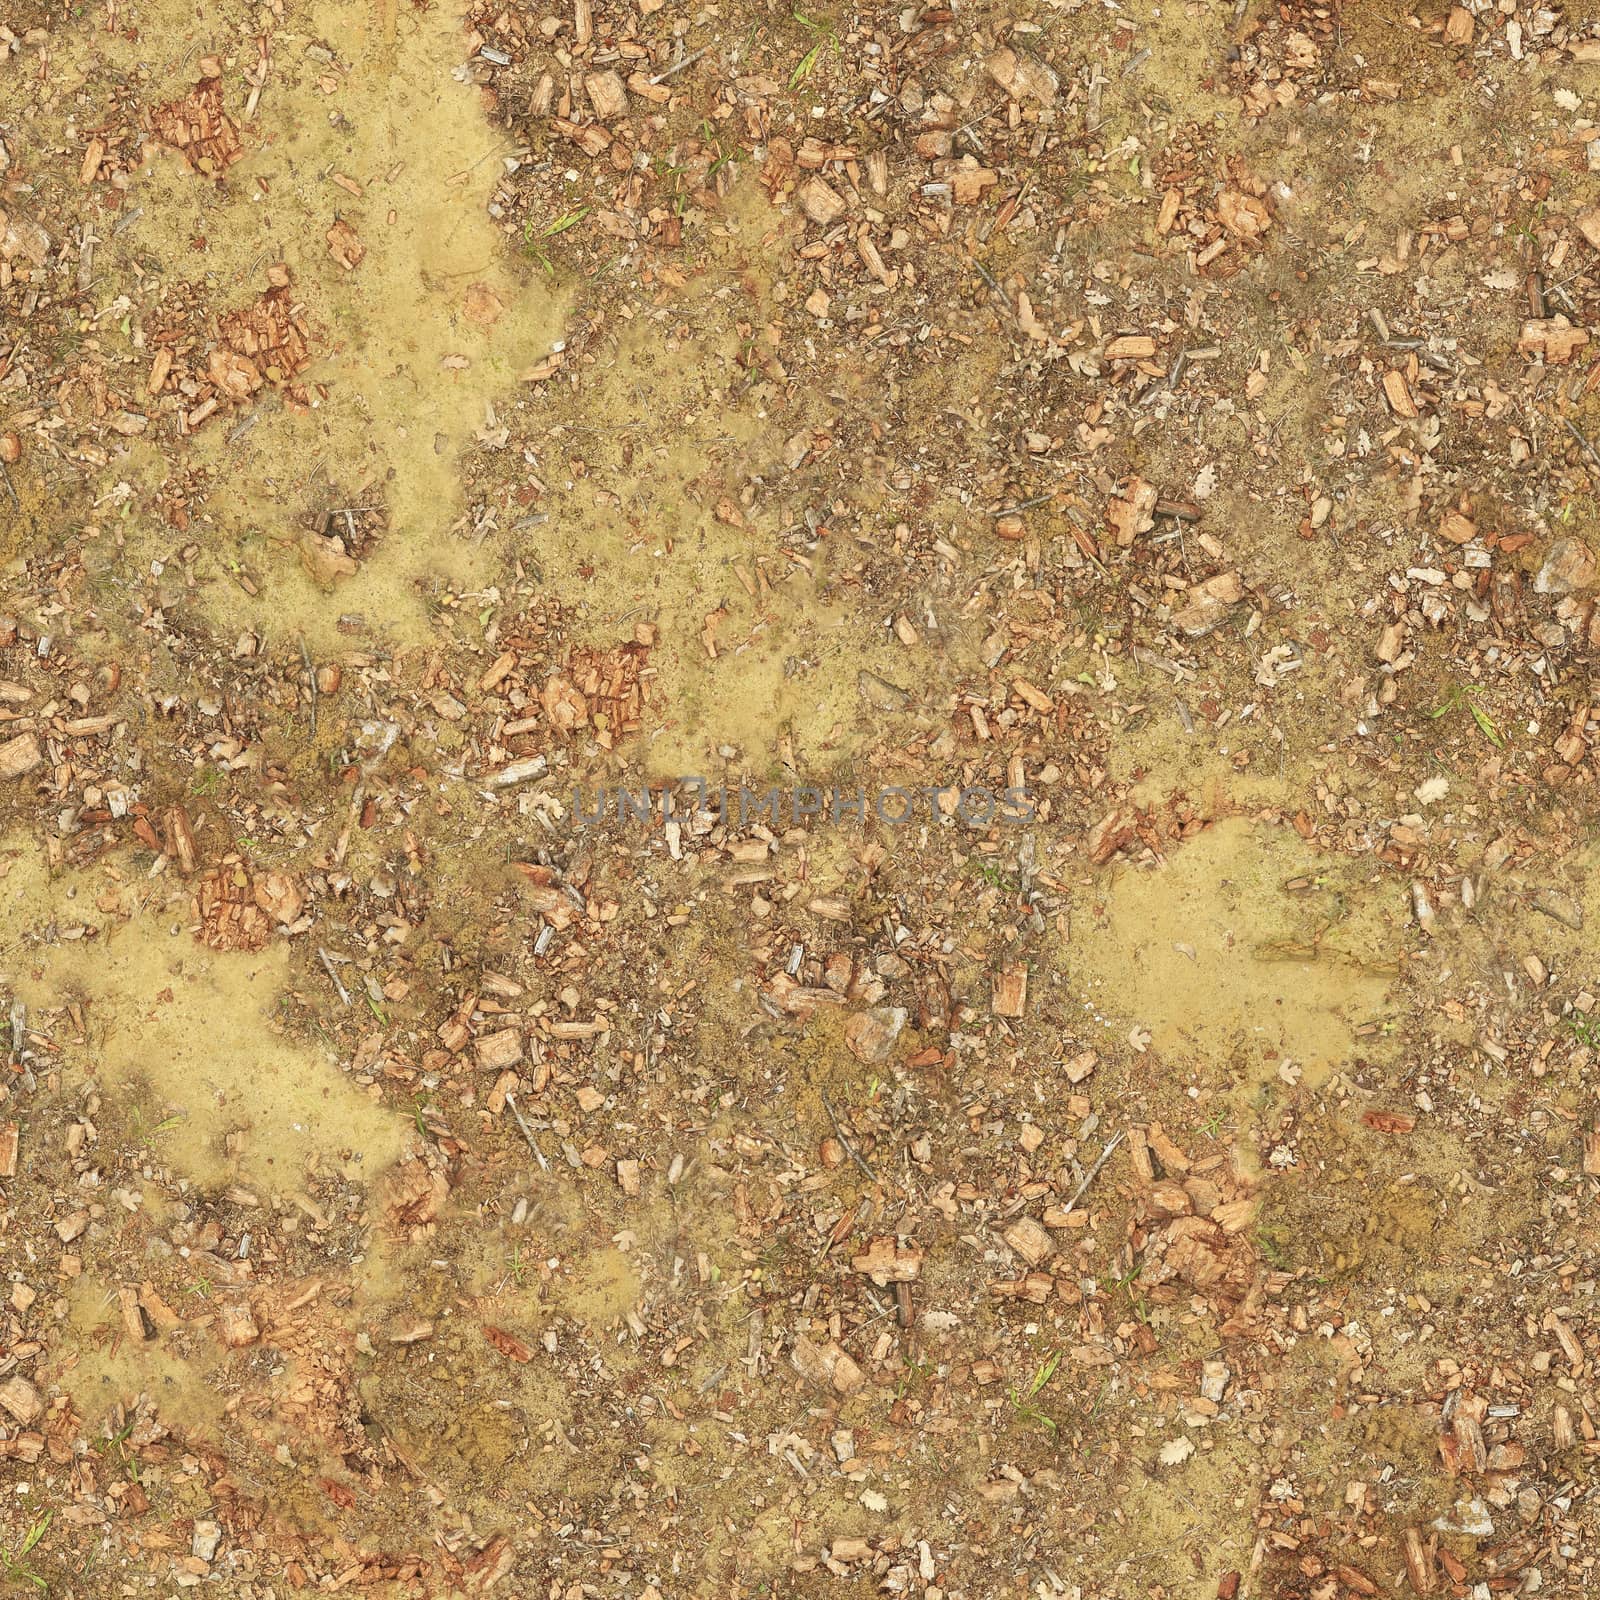 Sand under the feet of Golden color with irregularities and stones.Texture or background.